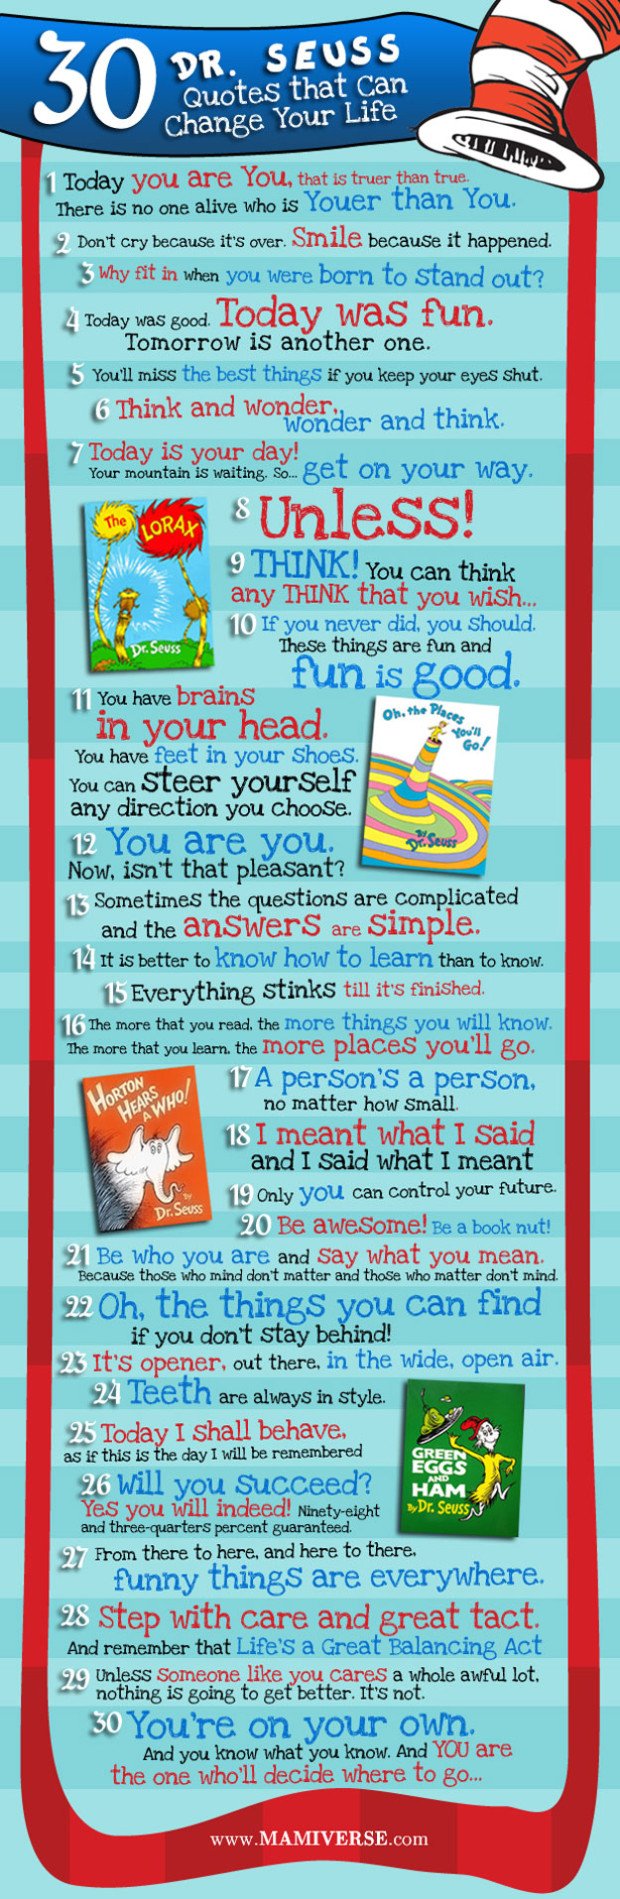 dr-seuss-quotes-life-infographic